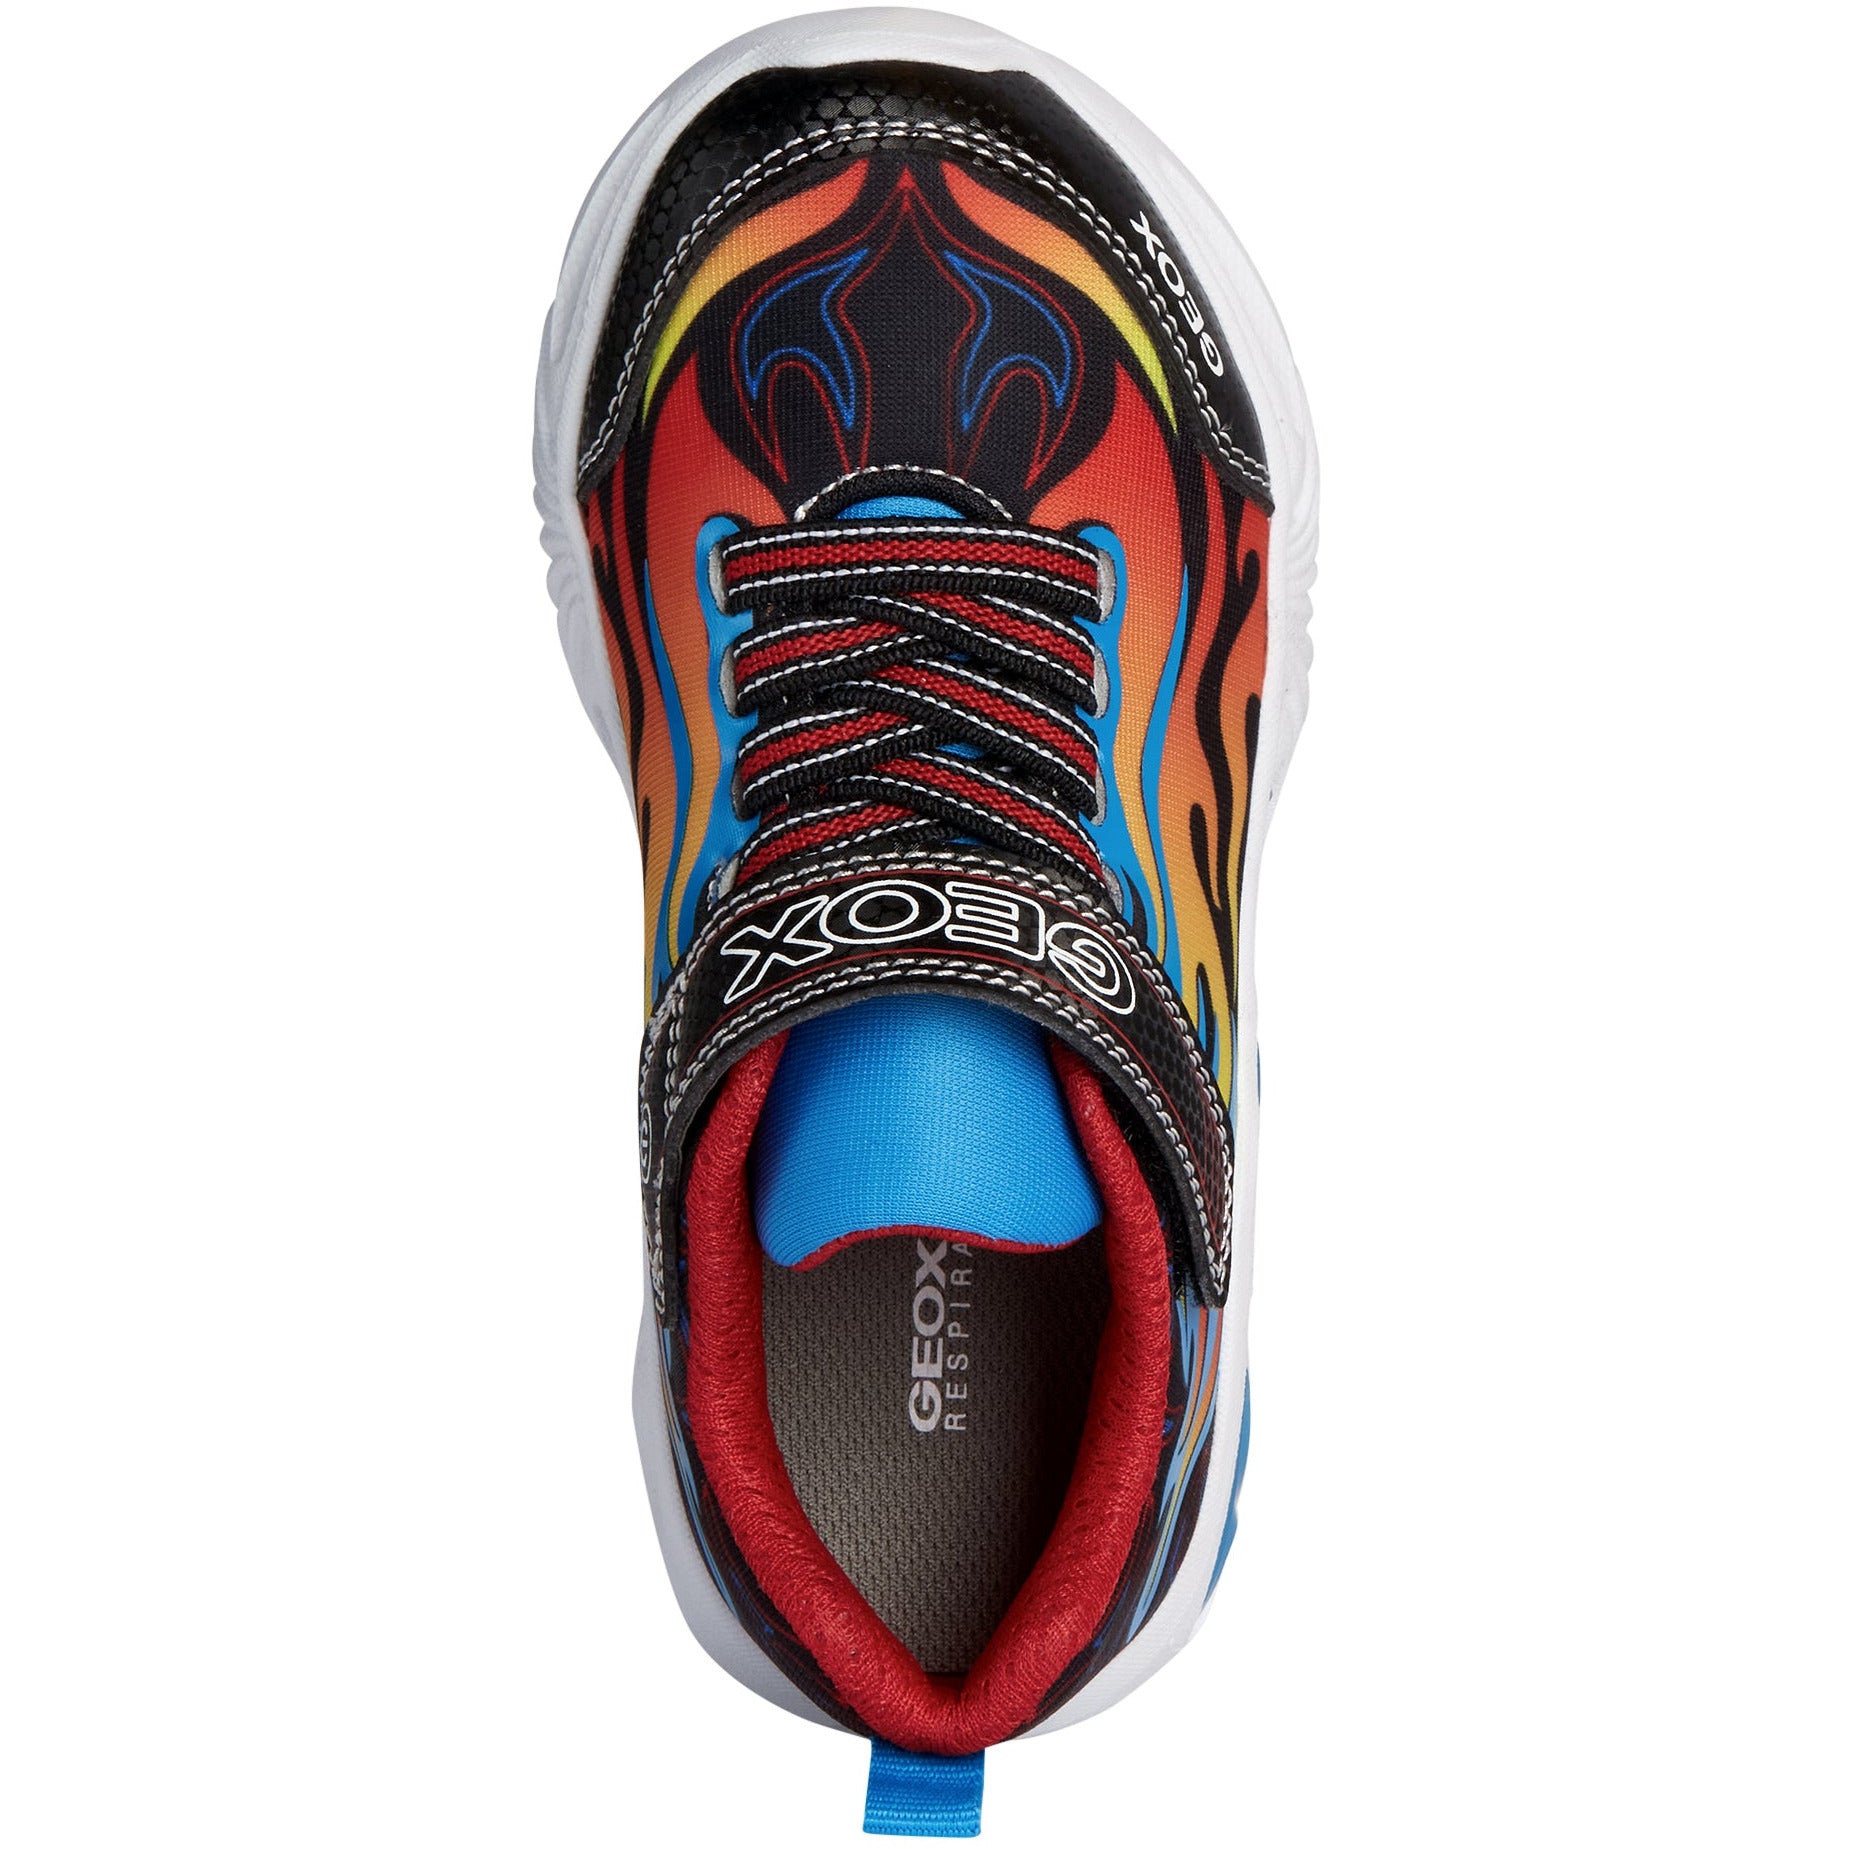 GEOX Assister(J35DZC)- Boys Velcro Trainer with Lights in Black Multi. Geox Shoes | Childrens Shoe Fitting | Wisemans | Bantry | West Cork | Ireland